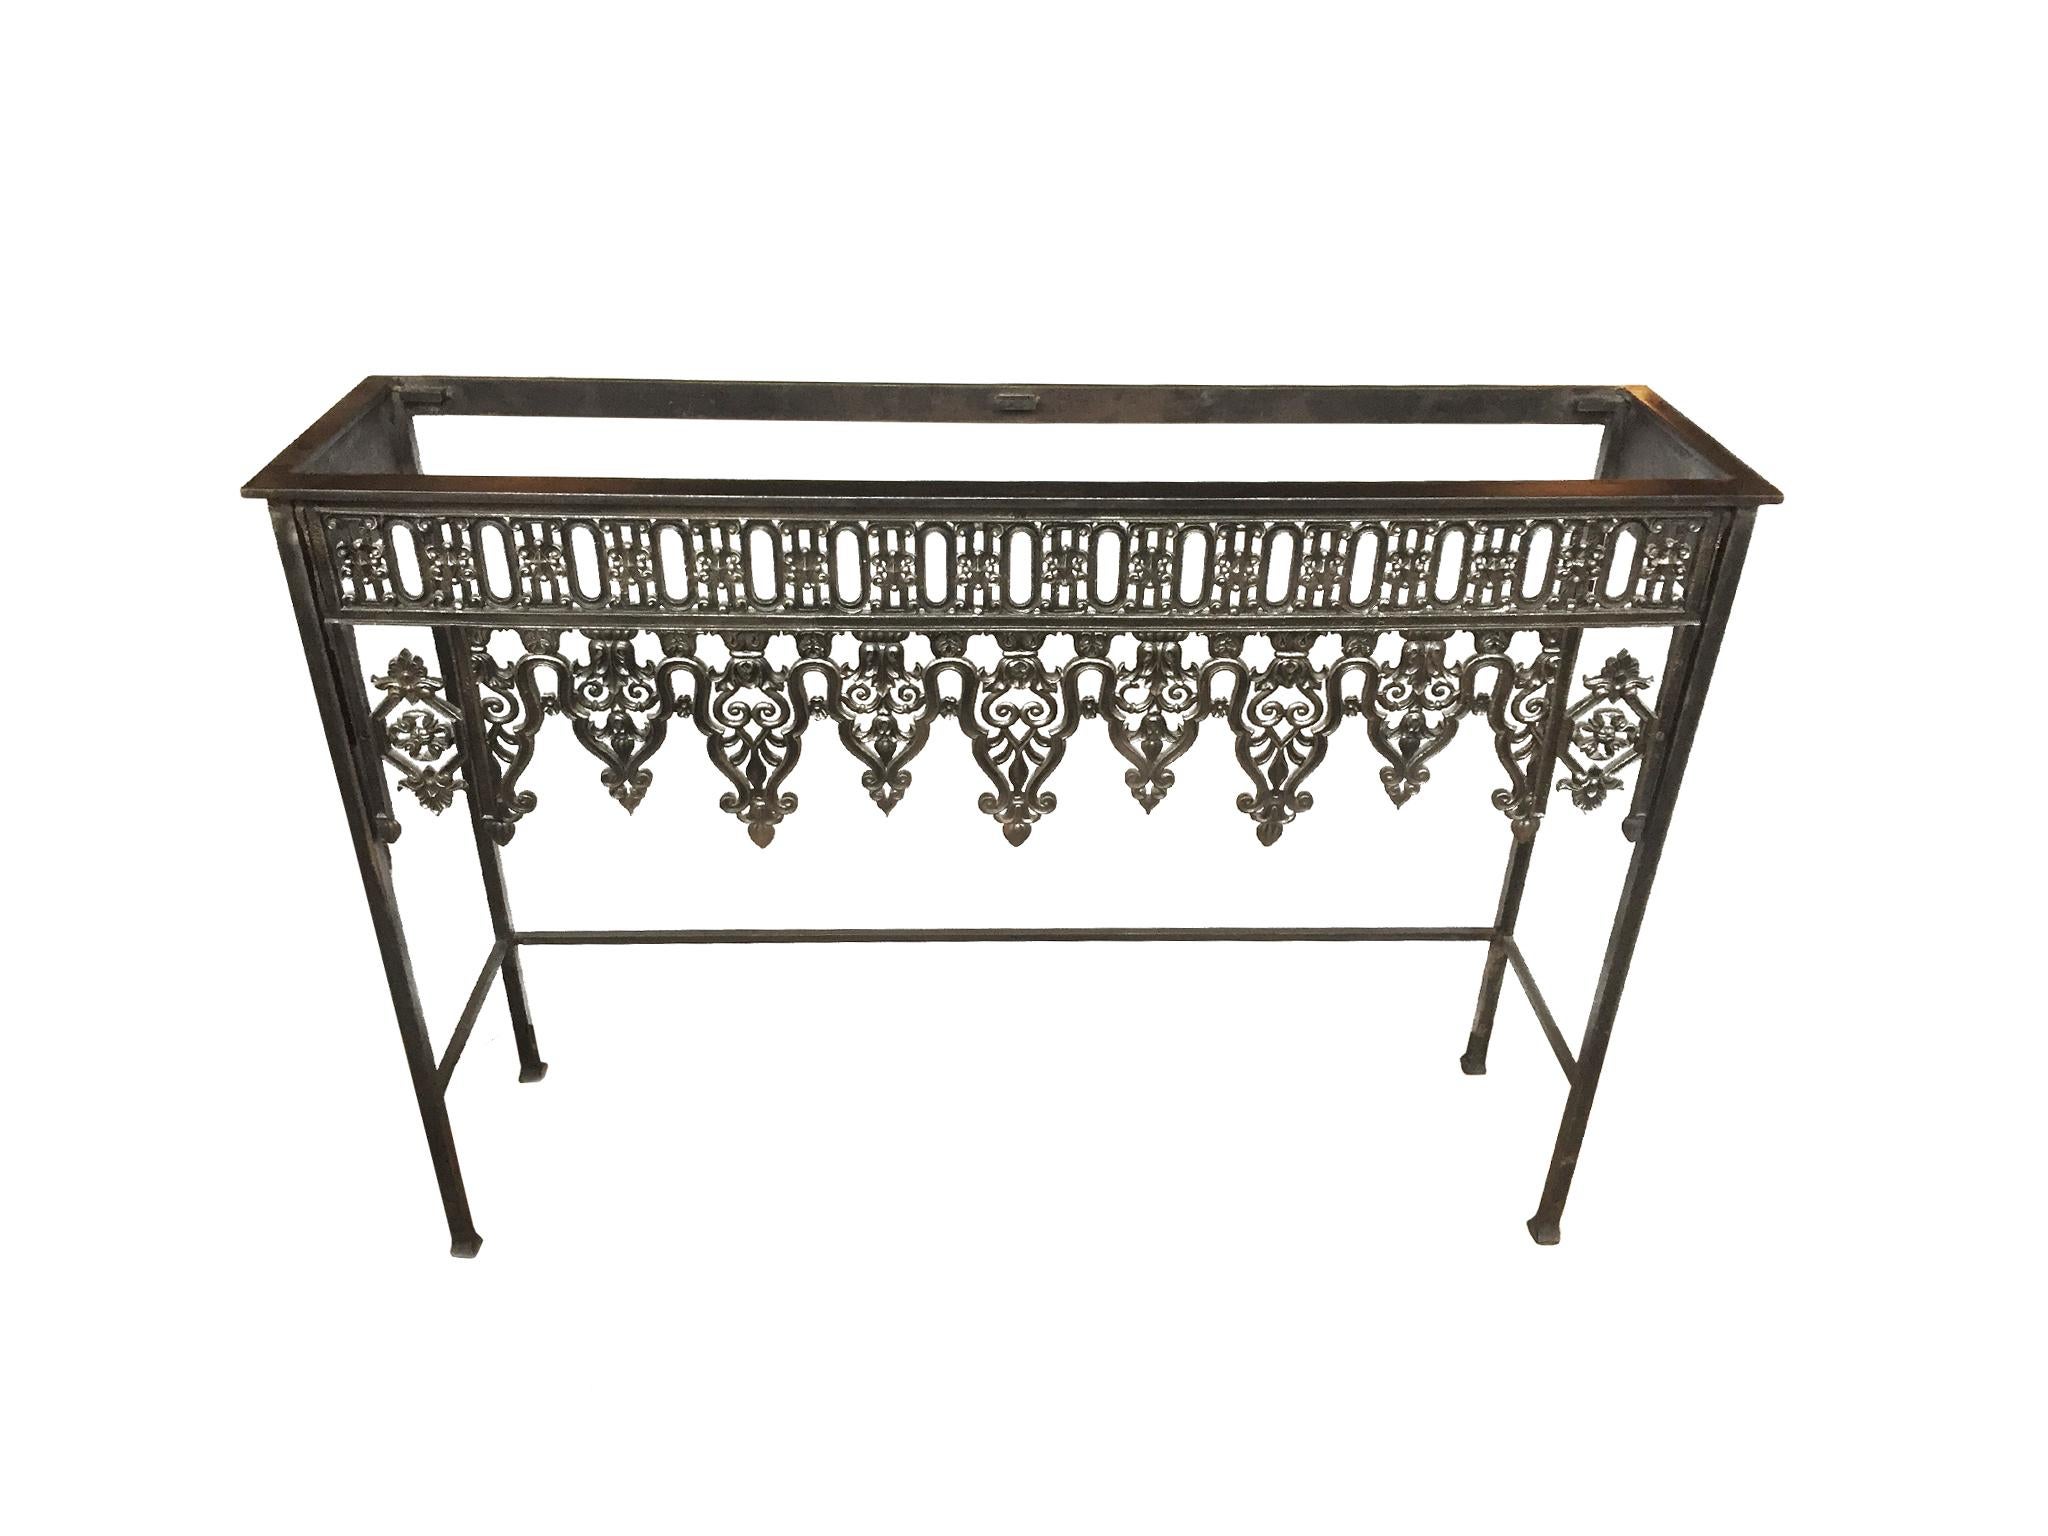 This 20th century console table is comprised of a steel frame, a glass top insert, and wrought iron grillwork. The grillwork itself is antique, circa mid-late 19th century. This marriage of old and new, custom designs creates an elegant combination